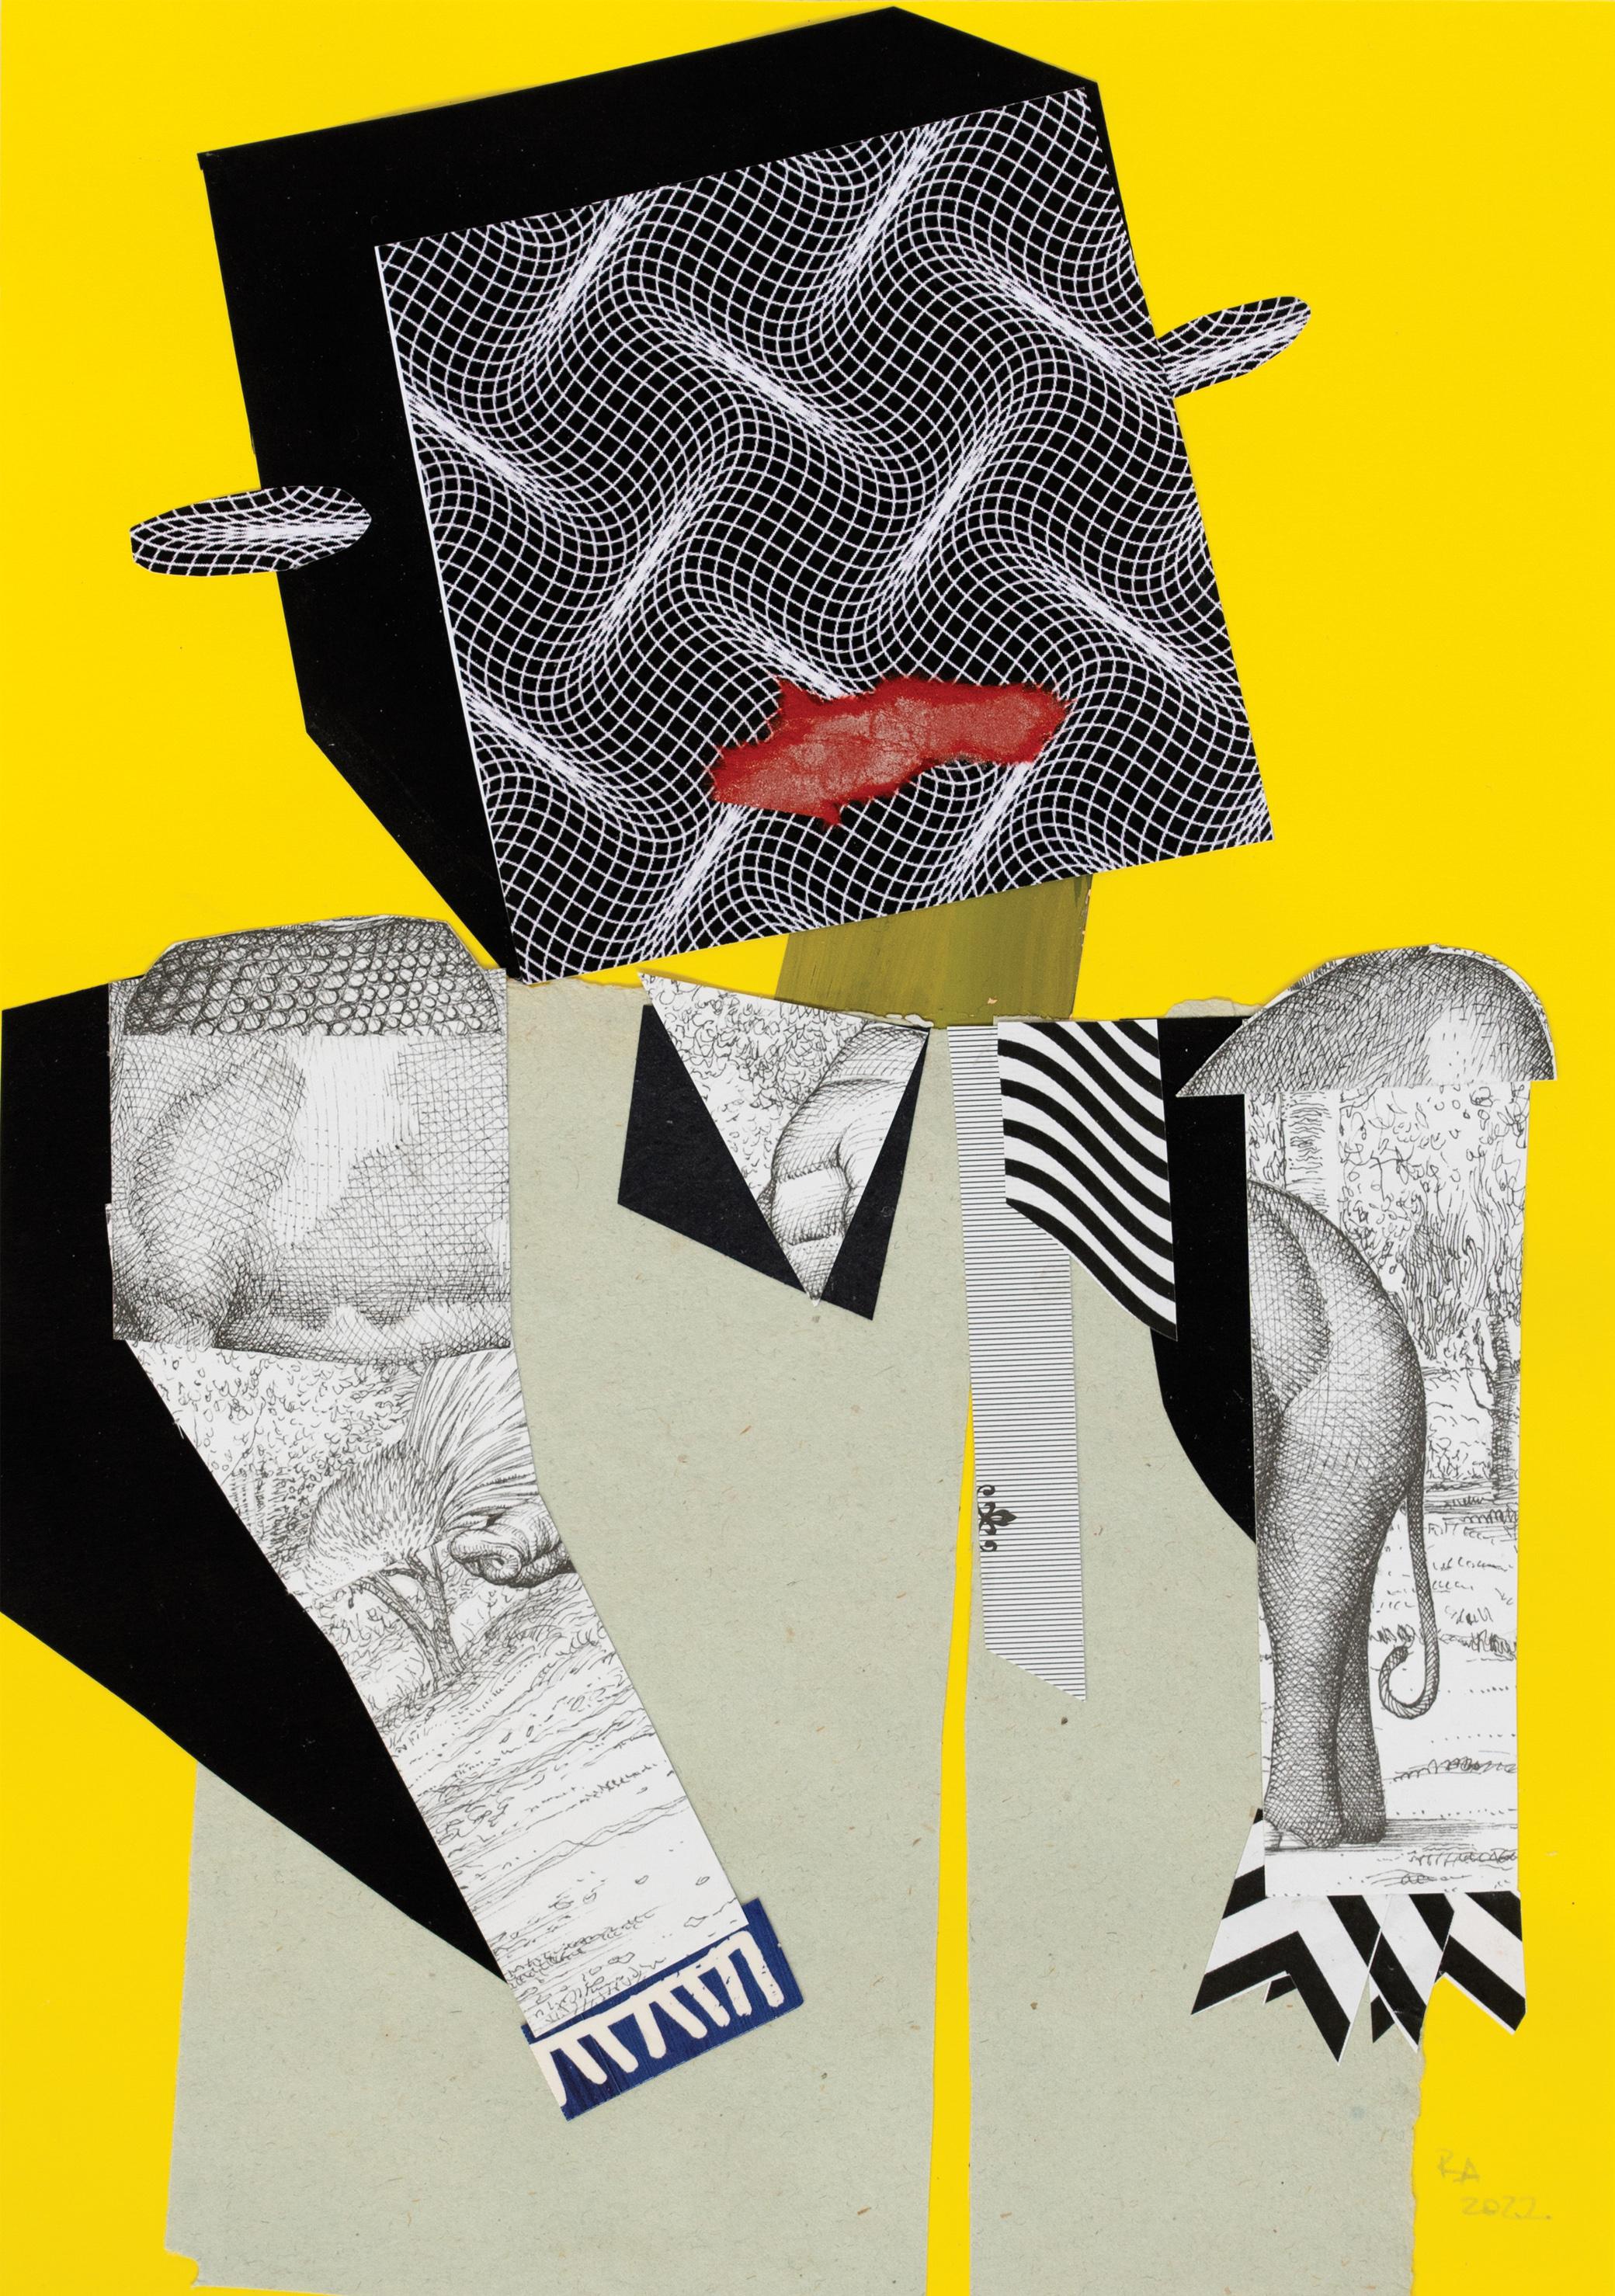 The Character from the Mirror - Yellow, Black, Collage, Surrealism - Mixed Media Art by Raluca Arnăutu